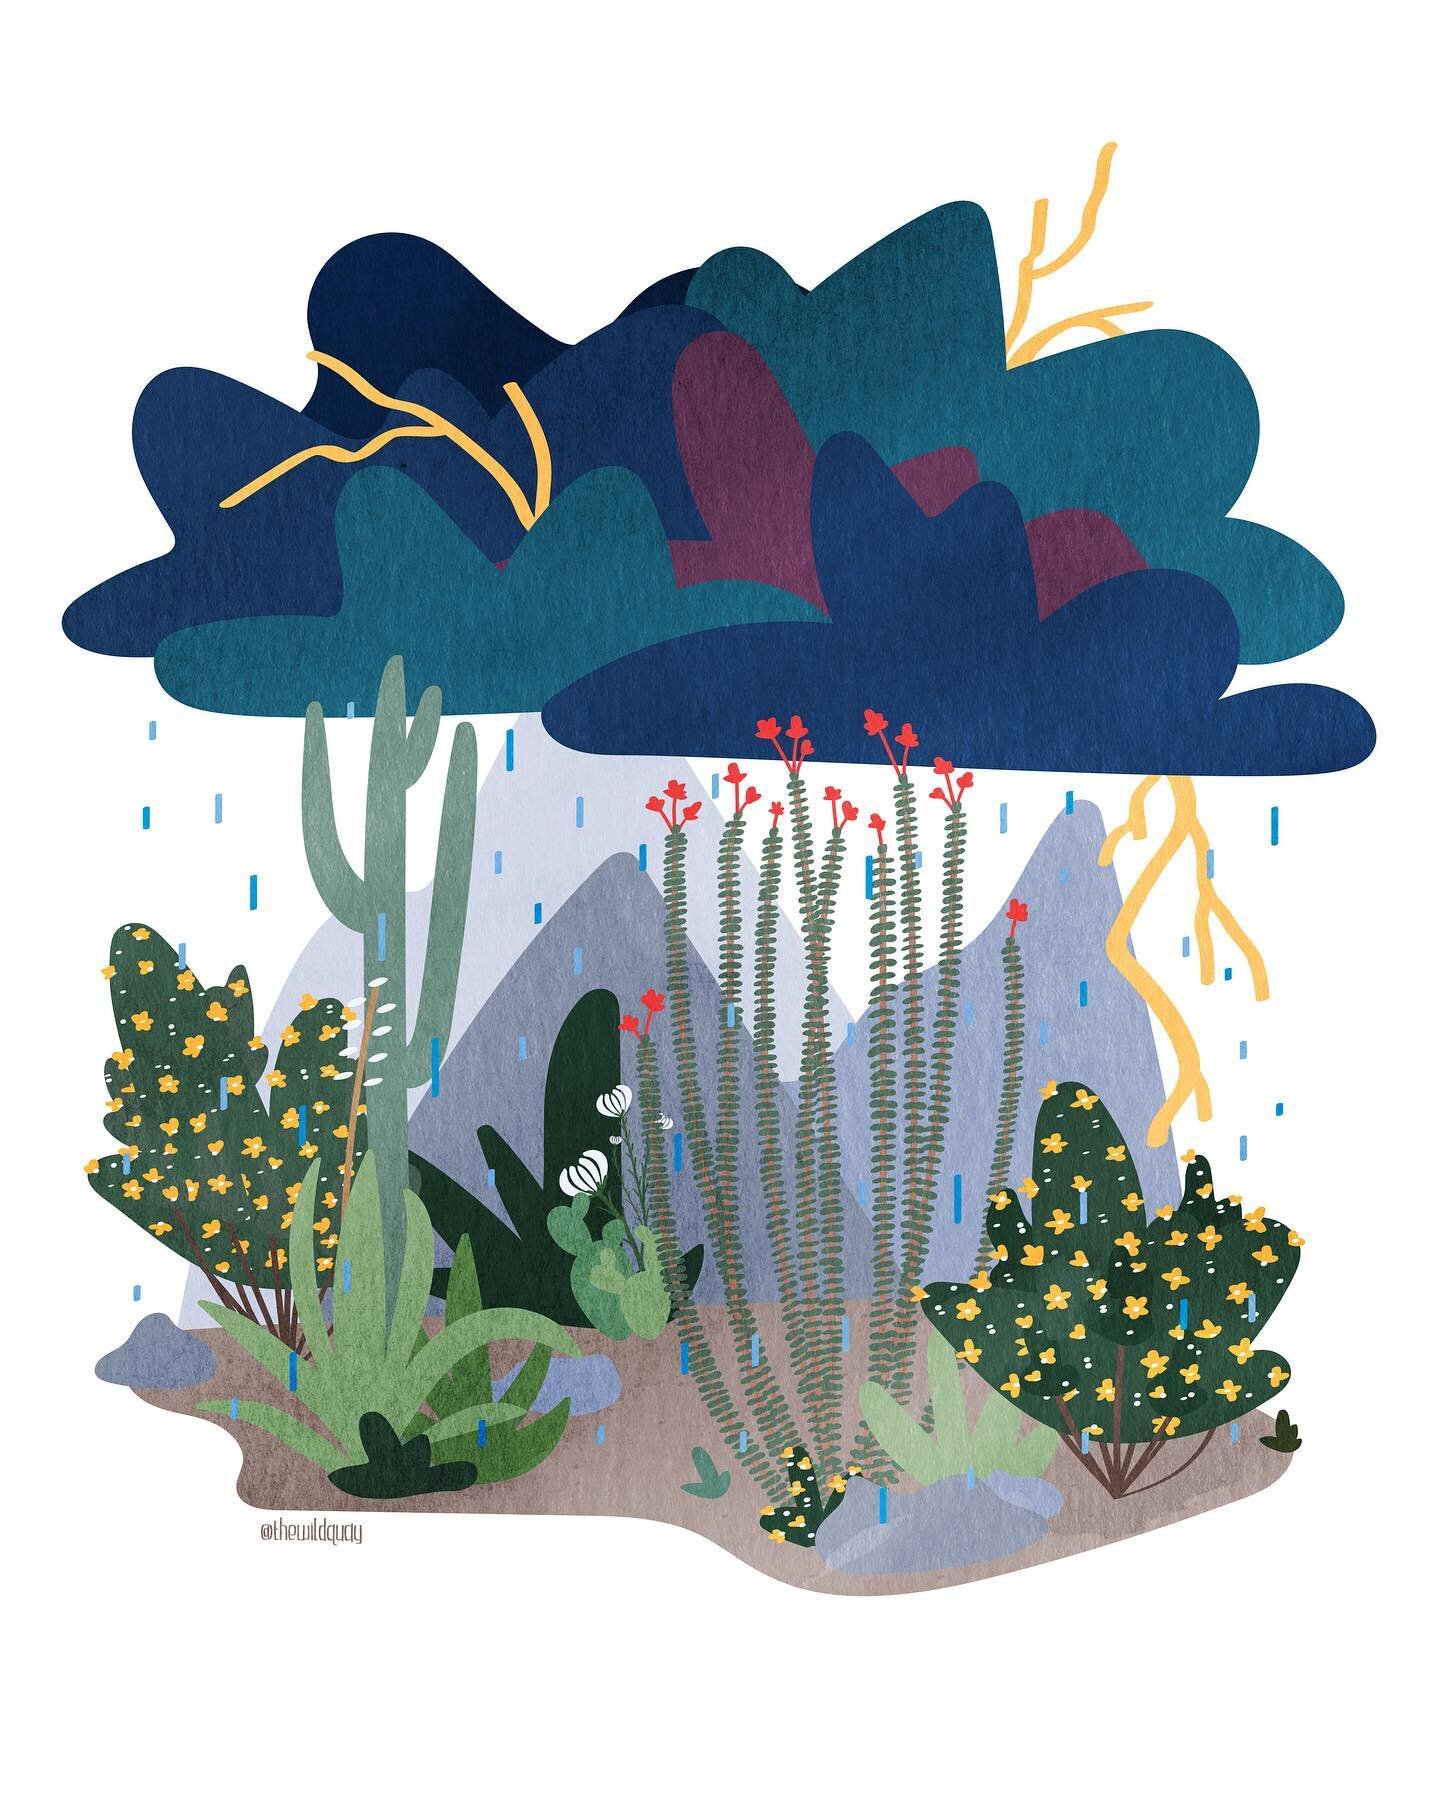 Monsoooons ⛈

Ahh, monsoon season &ndash; the exciting relief to the desert summer heat. I love watching these storms roll in and always have &ndash; the lightening flashes, booming thunder, rain, and the smell (AZ peeps, you know). There&rsquo;s som